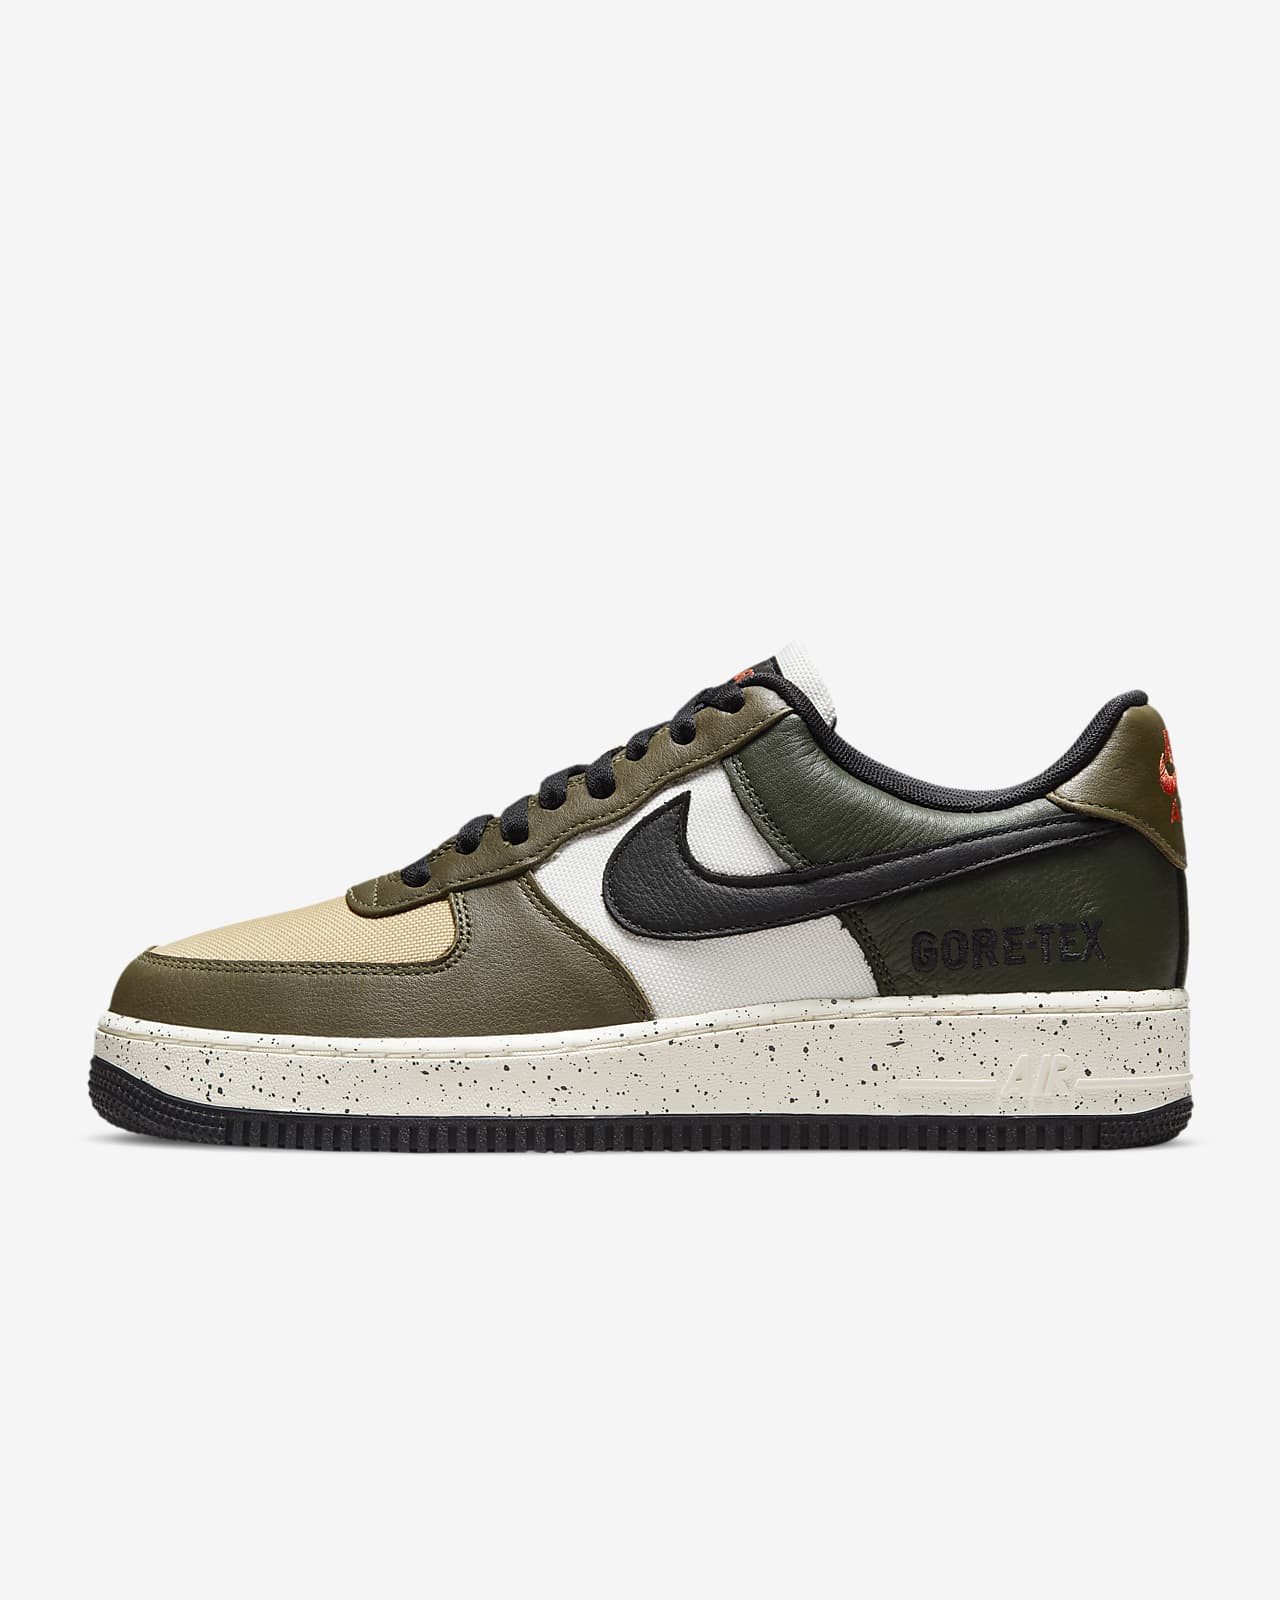 Counsel police Frog Nike Air Force 1 GORE-TEX ® Men's Shoes. Nike ID